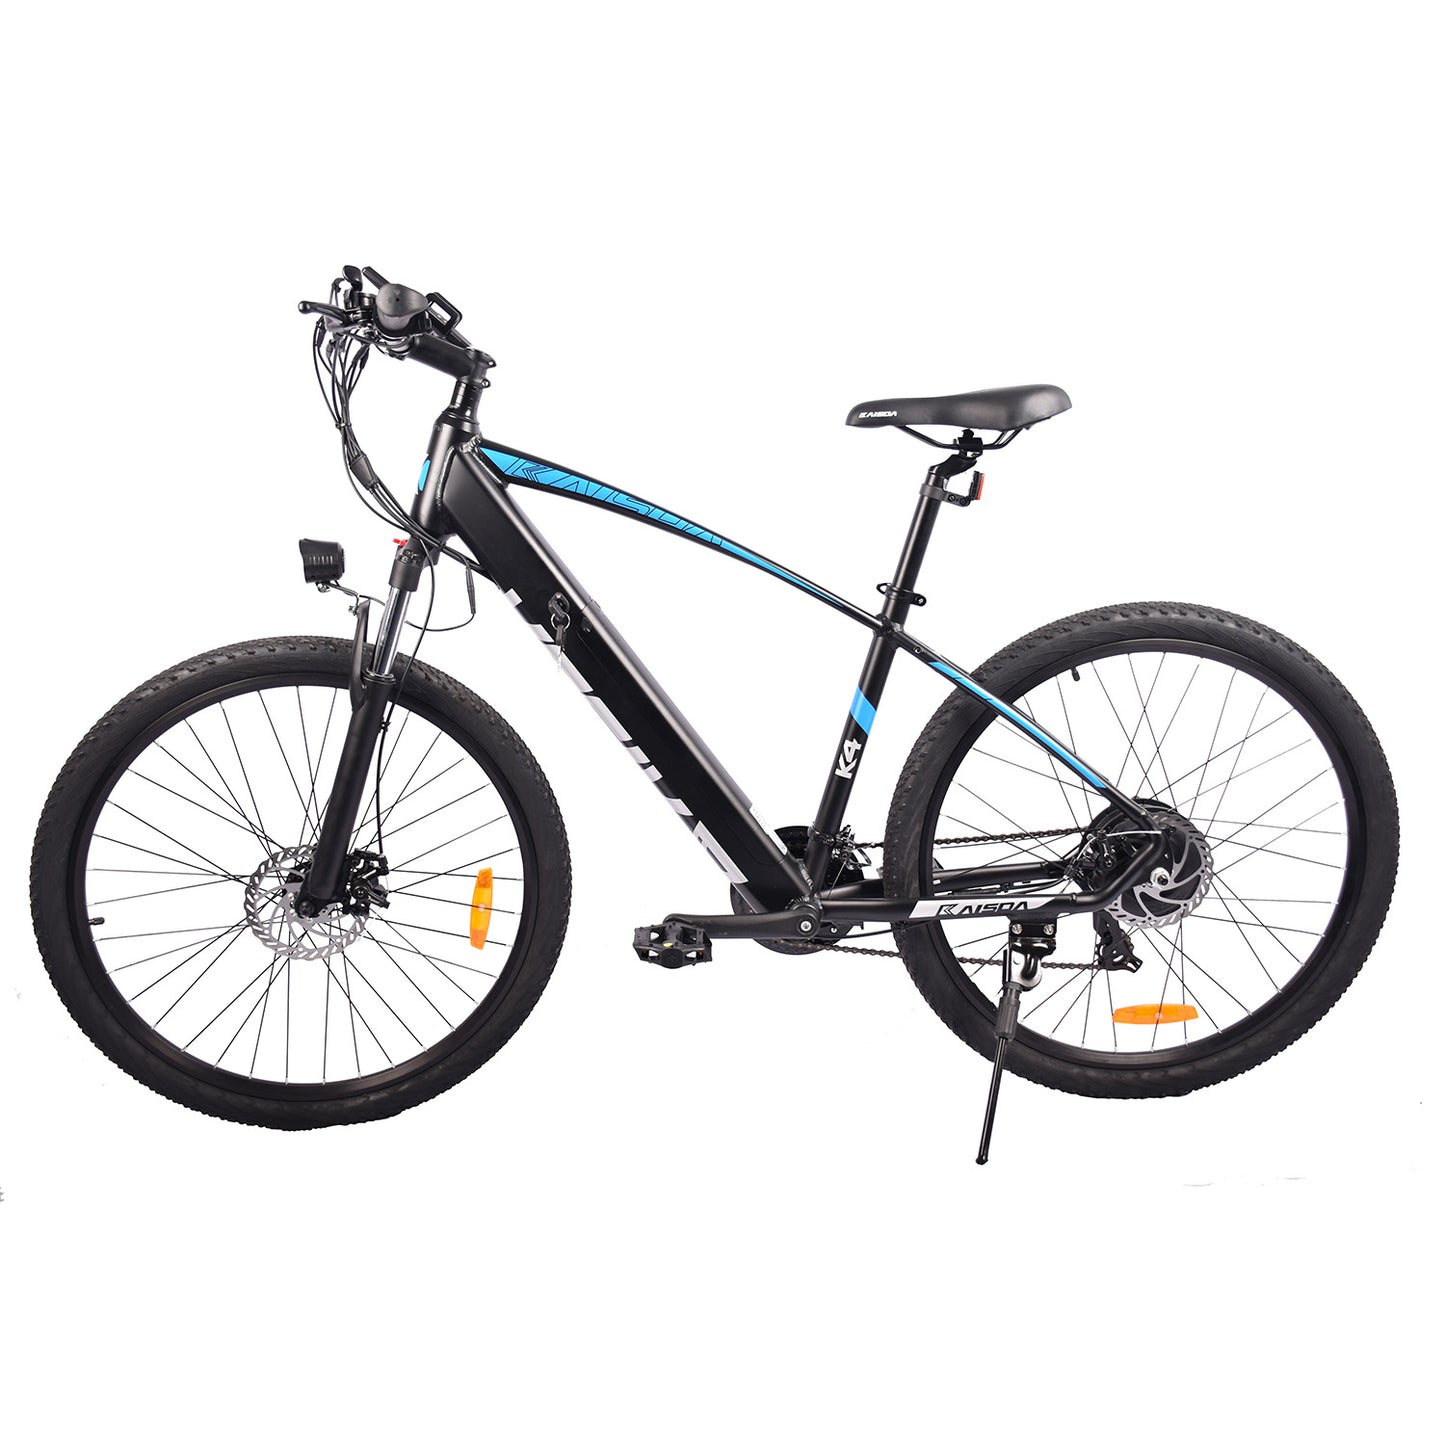 PL Warehouse Stock GYL082 27.5*1.95" Fat Tire Electric Bike with 350W Motor 36V 10Ah Battery